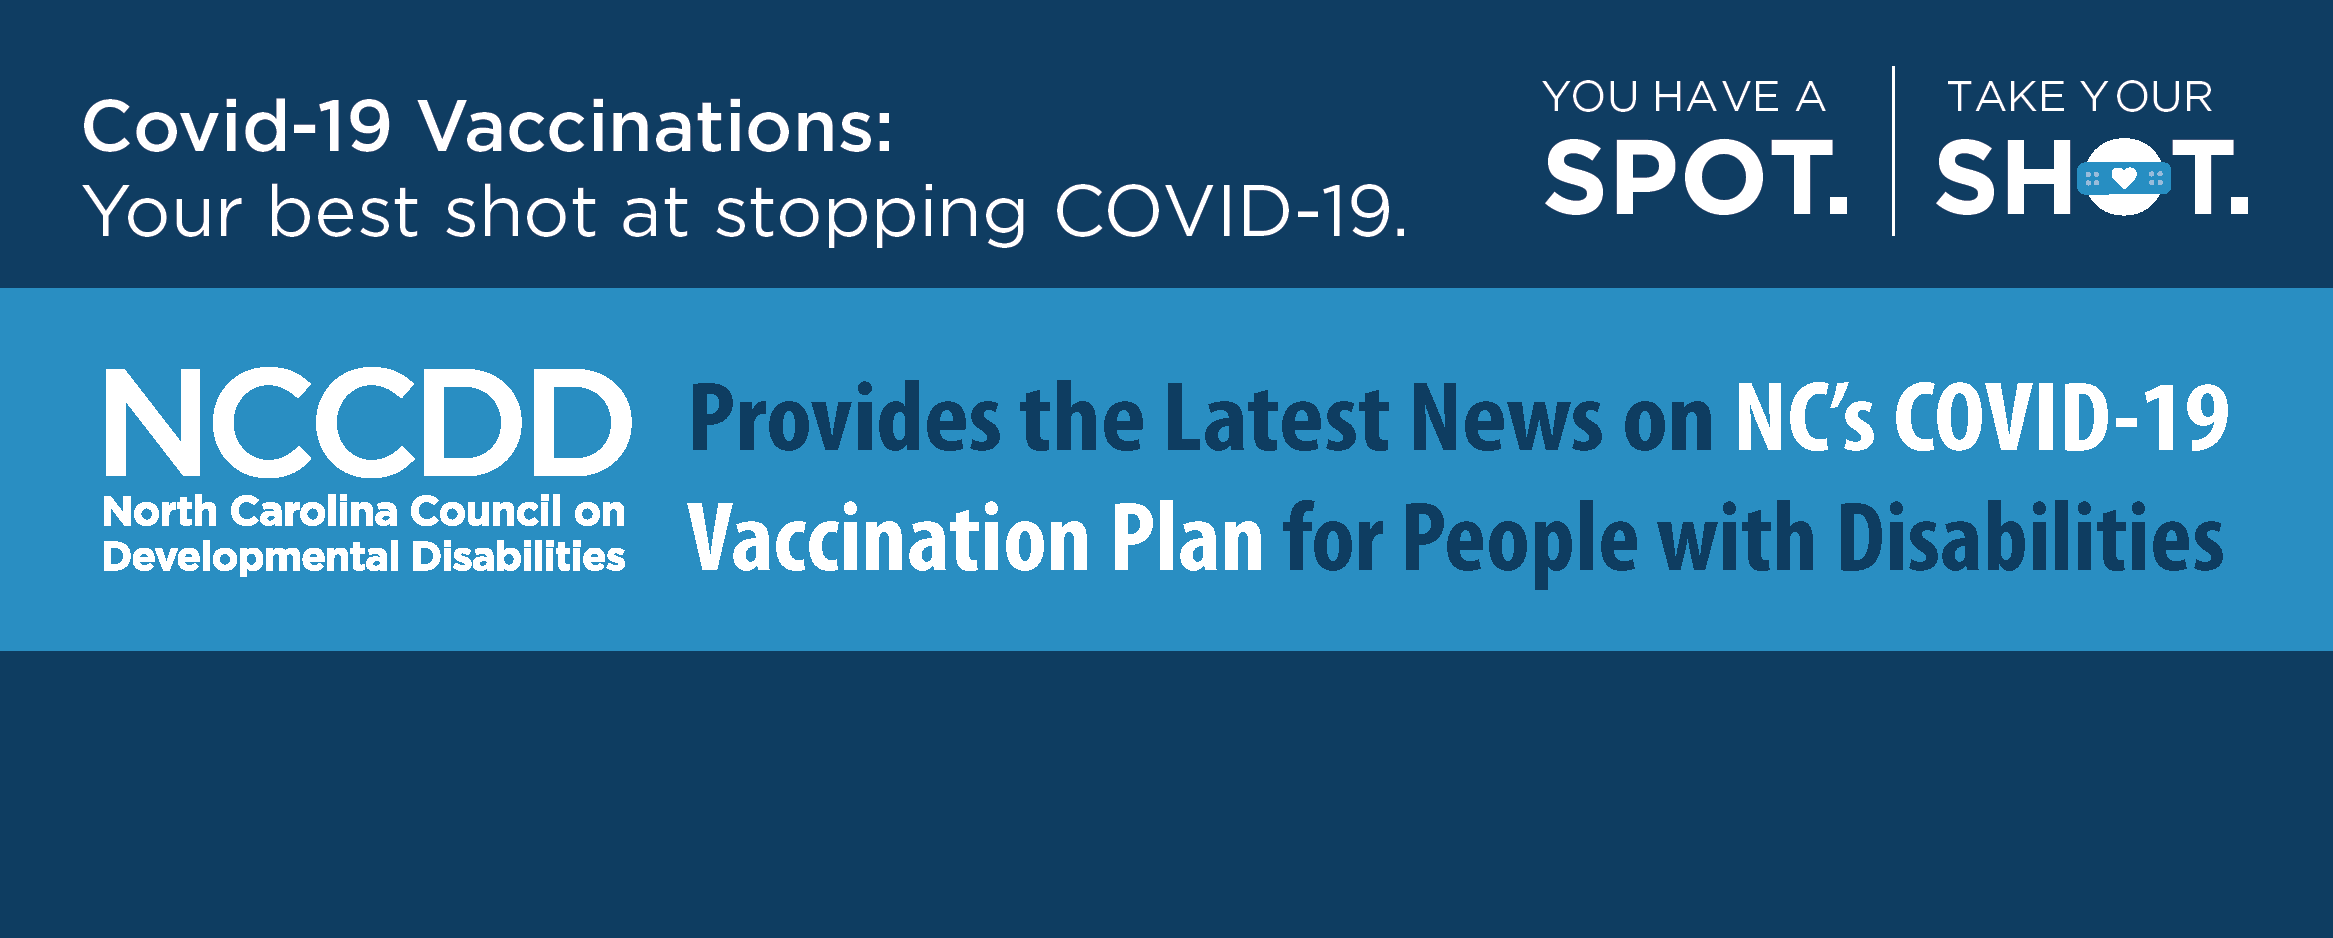 NCCDD Provides the Latest News on NC’s COVID-19 Vaccination Plan for People with Disabilities